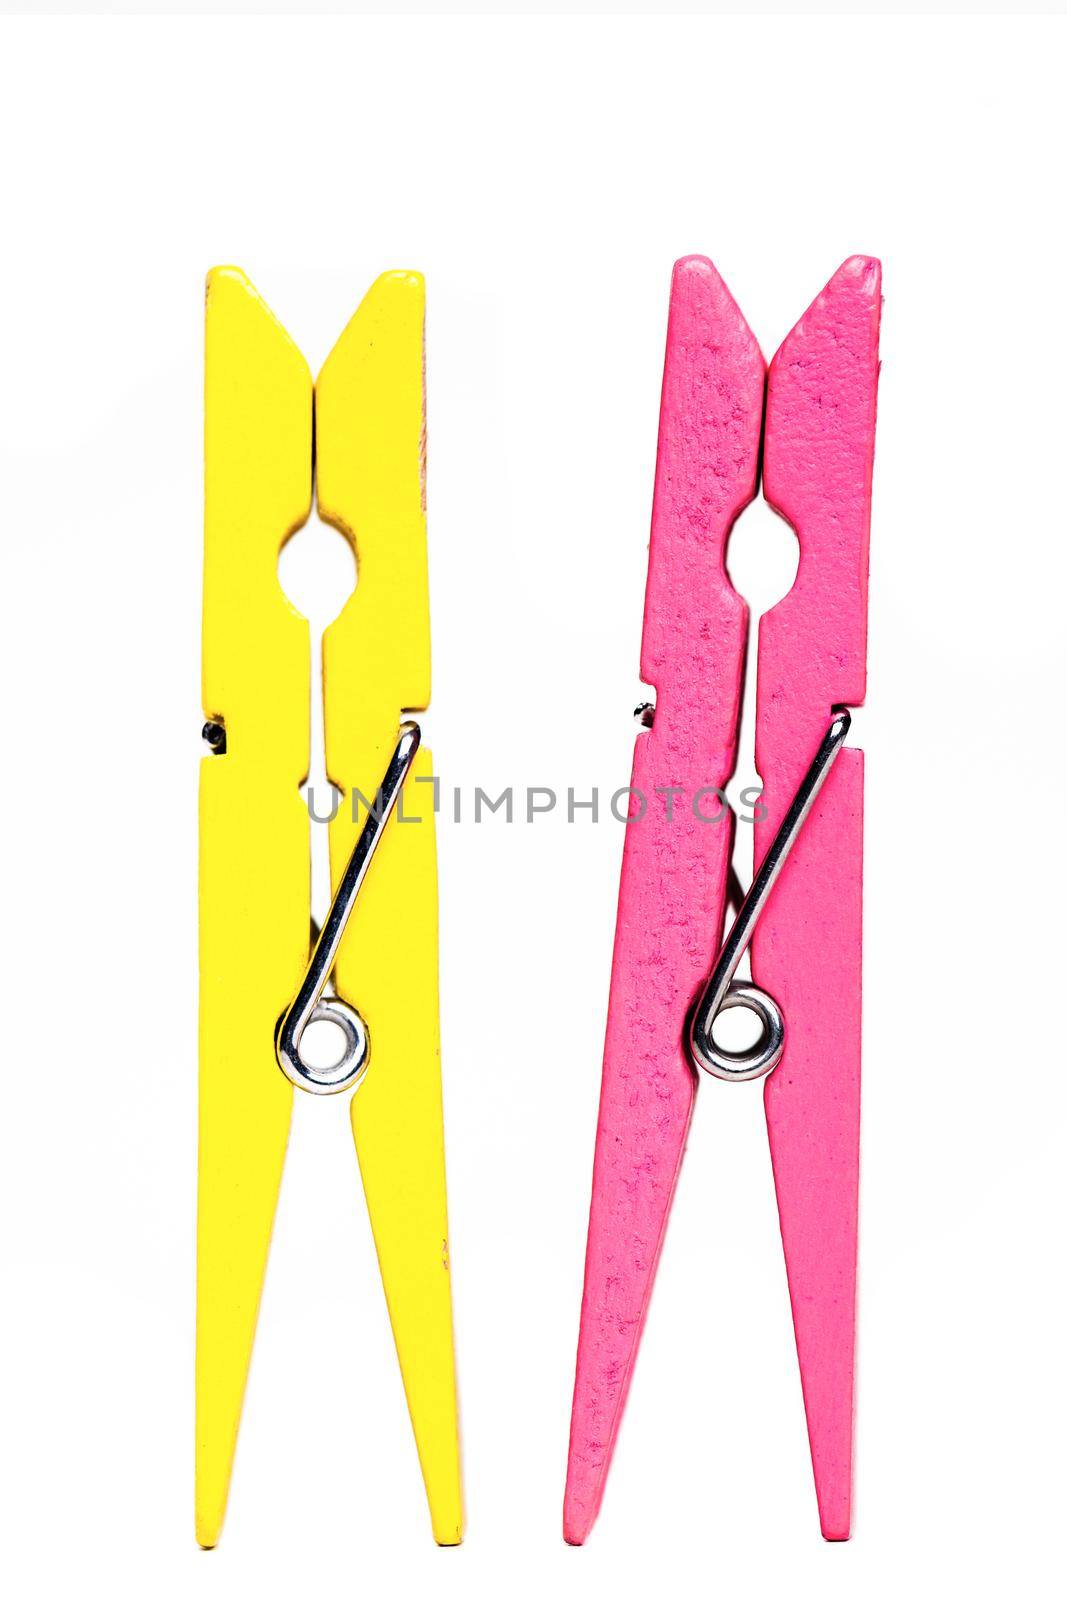 yellow and pink clothes pegs isolated on white background